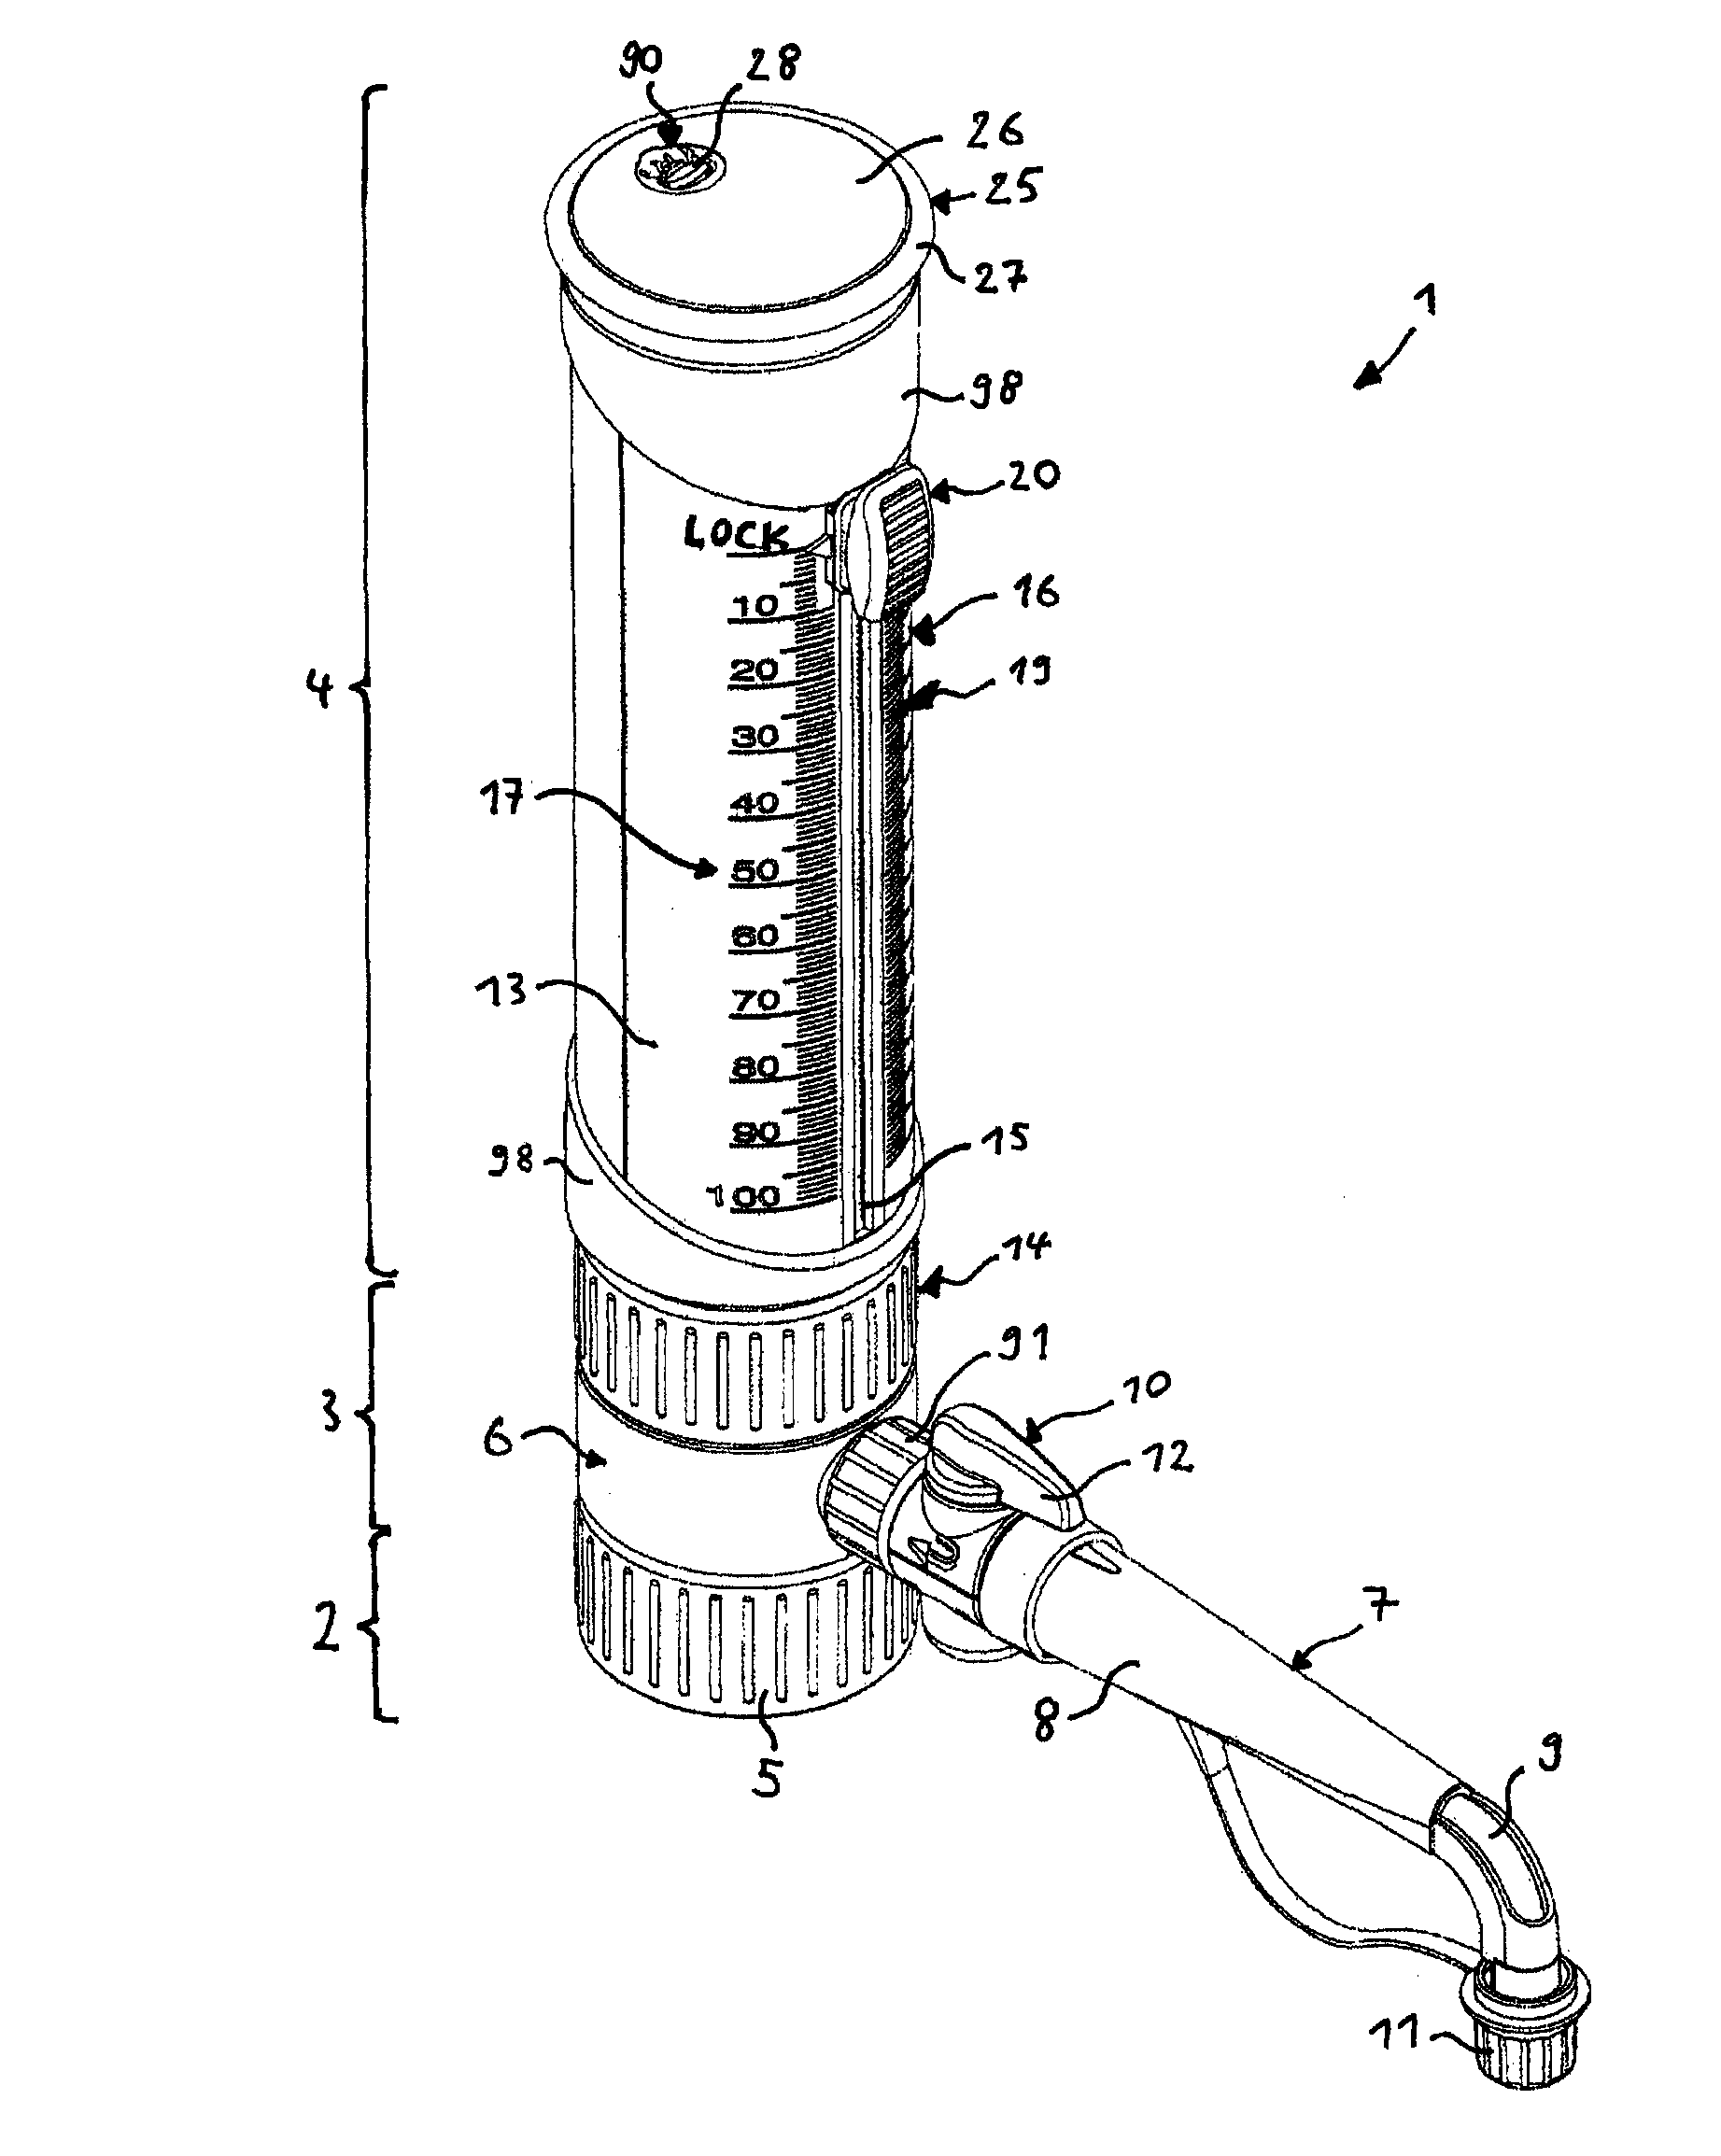 Variable-Volume Dispenser for Accurately Dispensing of an Adjusted Amount of Liquid